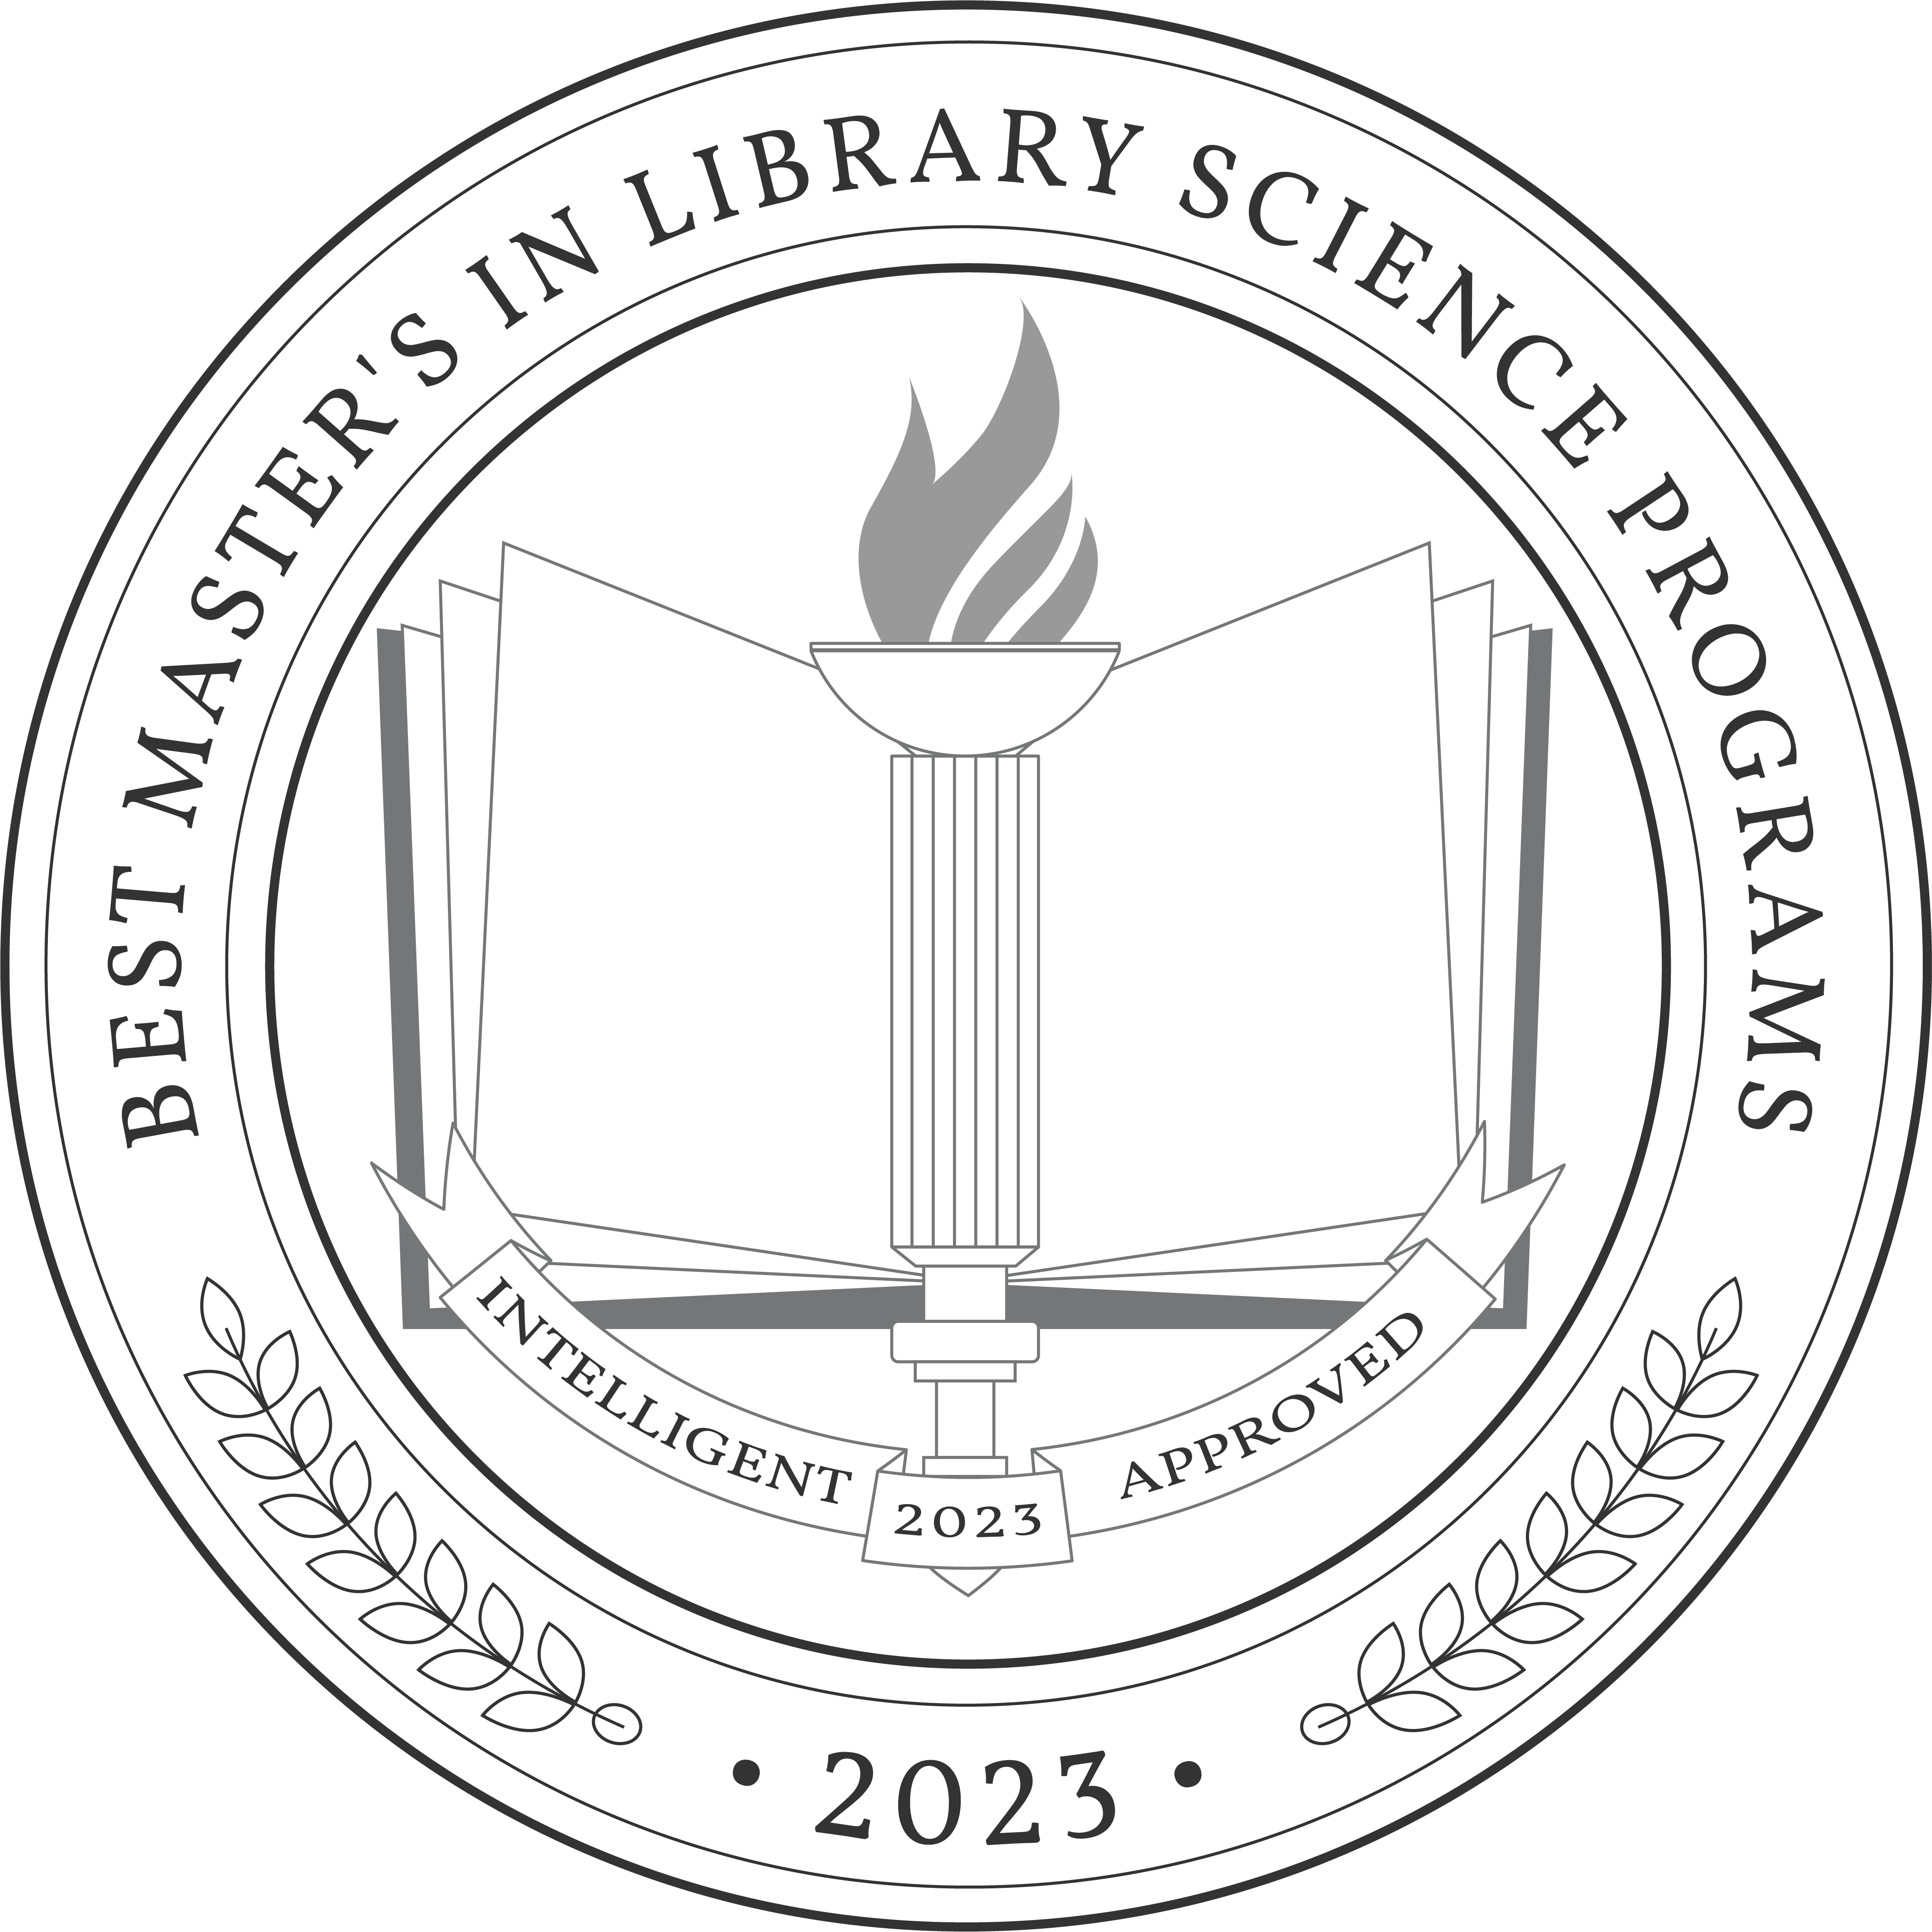 Best Master's in Library Science Programs 2023